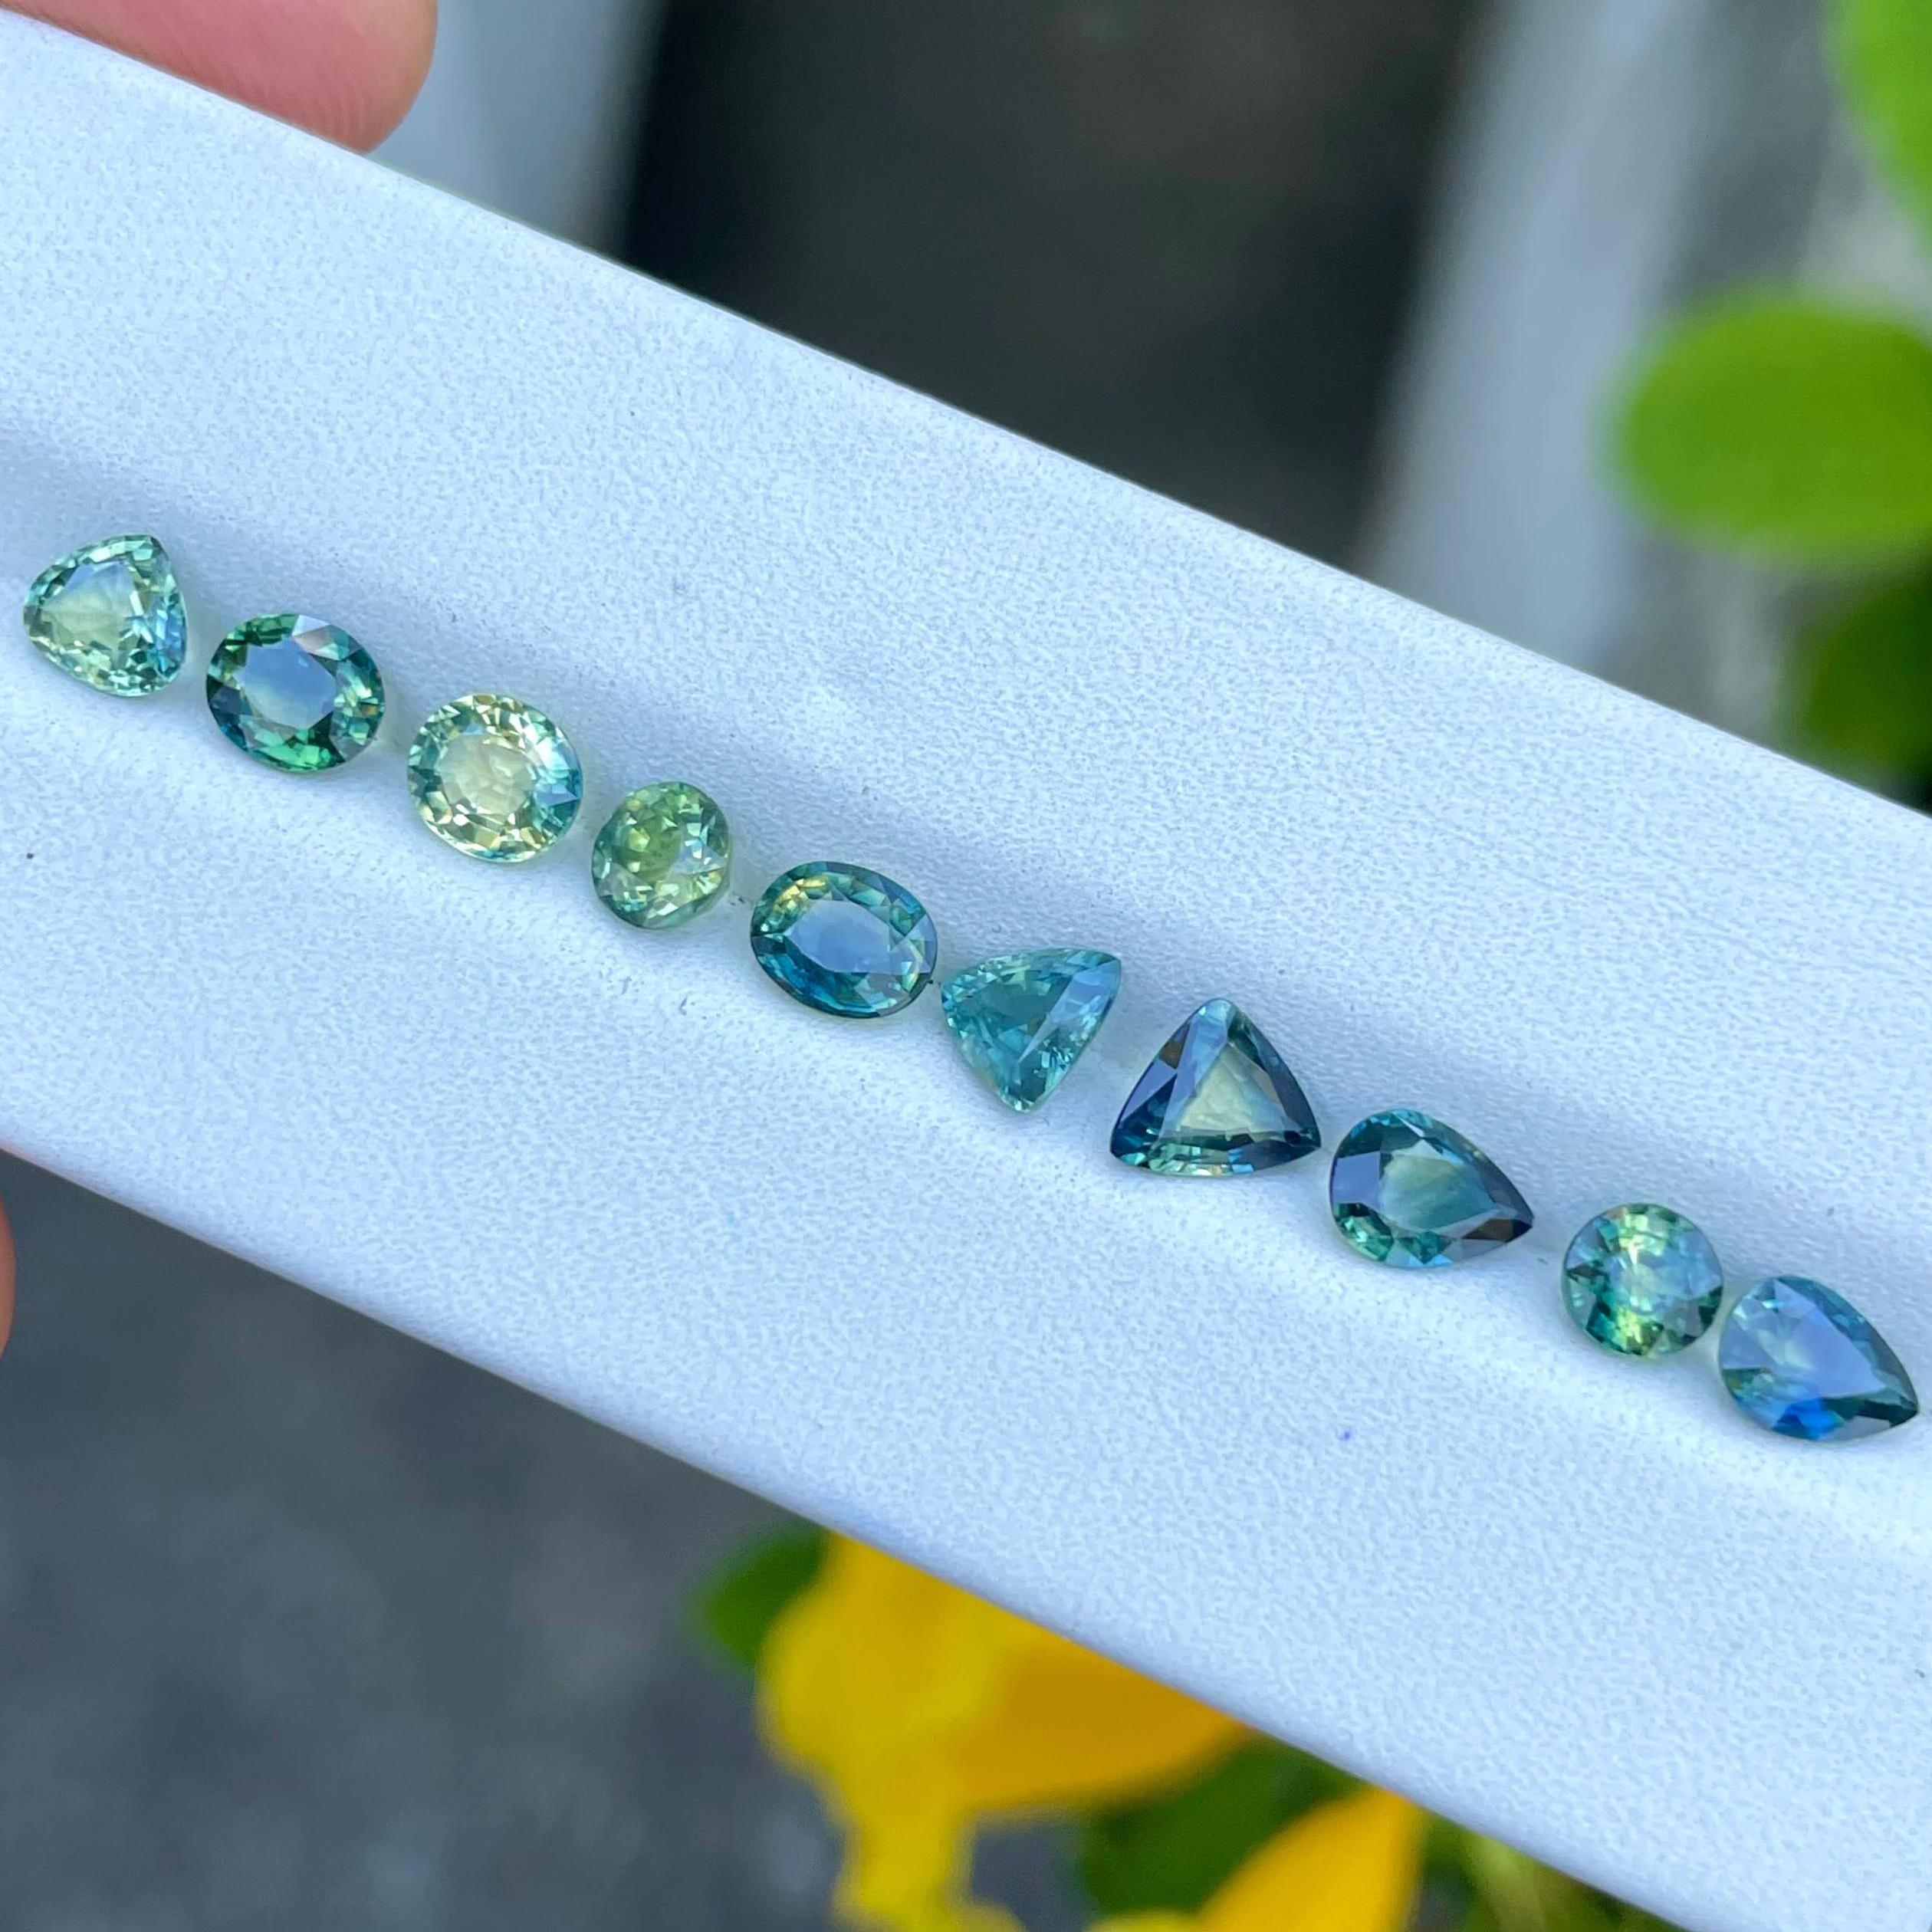 Weight 6.40 carats 
No. of Pieces 10 
Origin Madagascar 
Clarity VVS to eye clean 
Treatment Heated 





Elevate your gemstone collection with our exquisite Parti Sapphire 10-piece lot from Madagascar. Each gemstone in this rare collection boasts